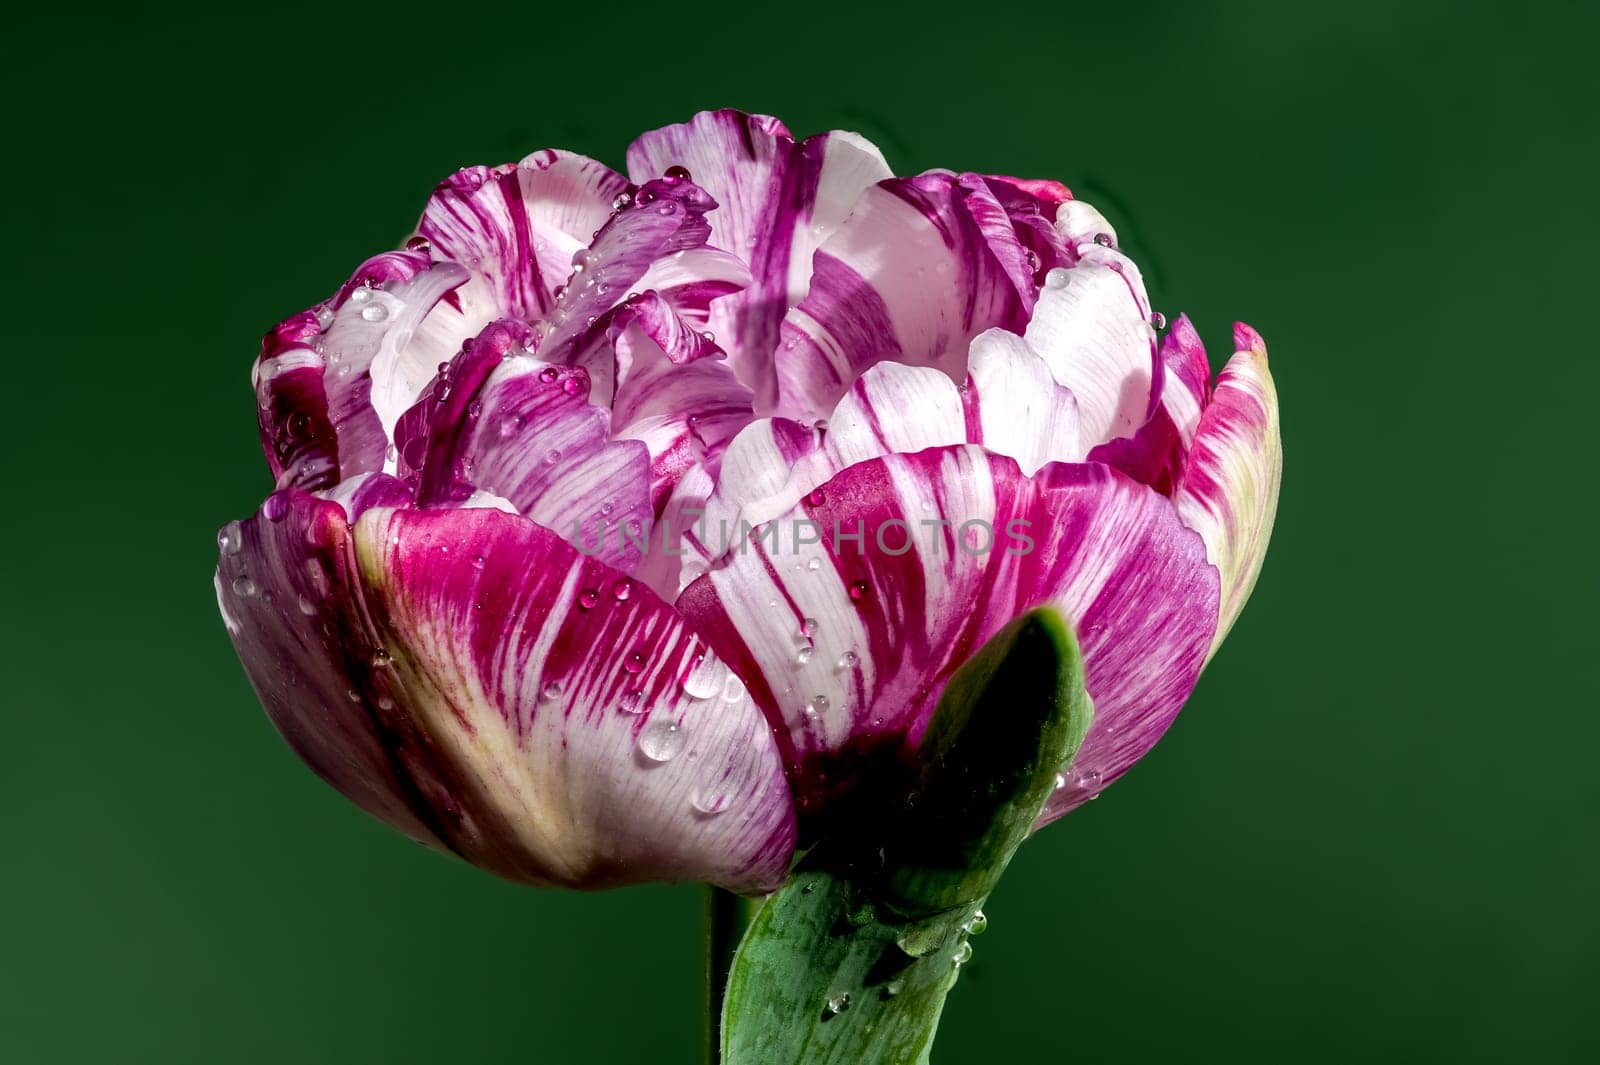 Blooming Tulip Jonquieres on a green background by Multipedia